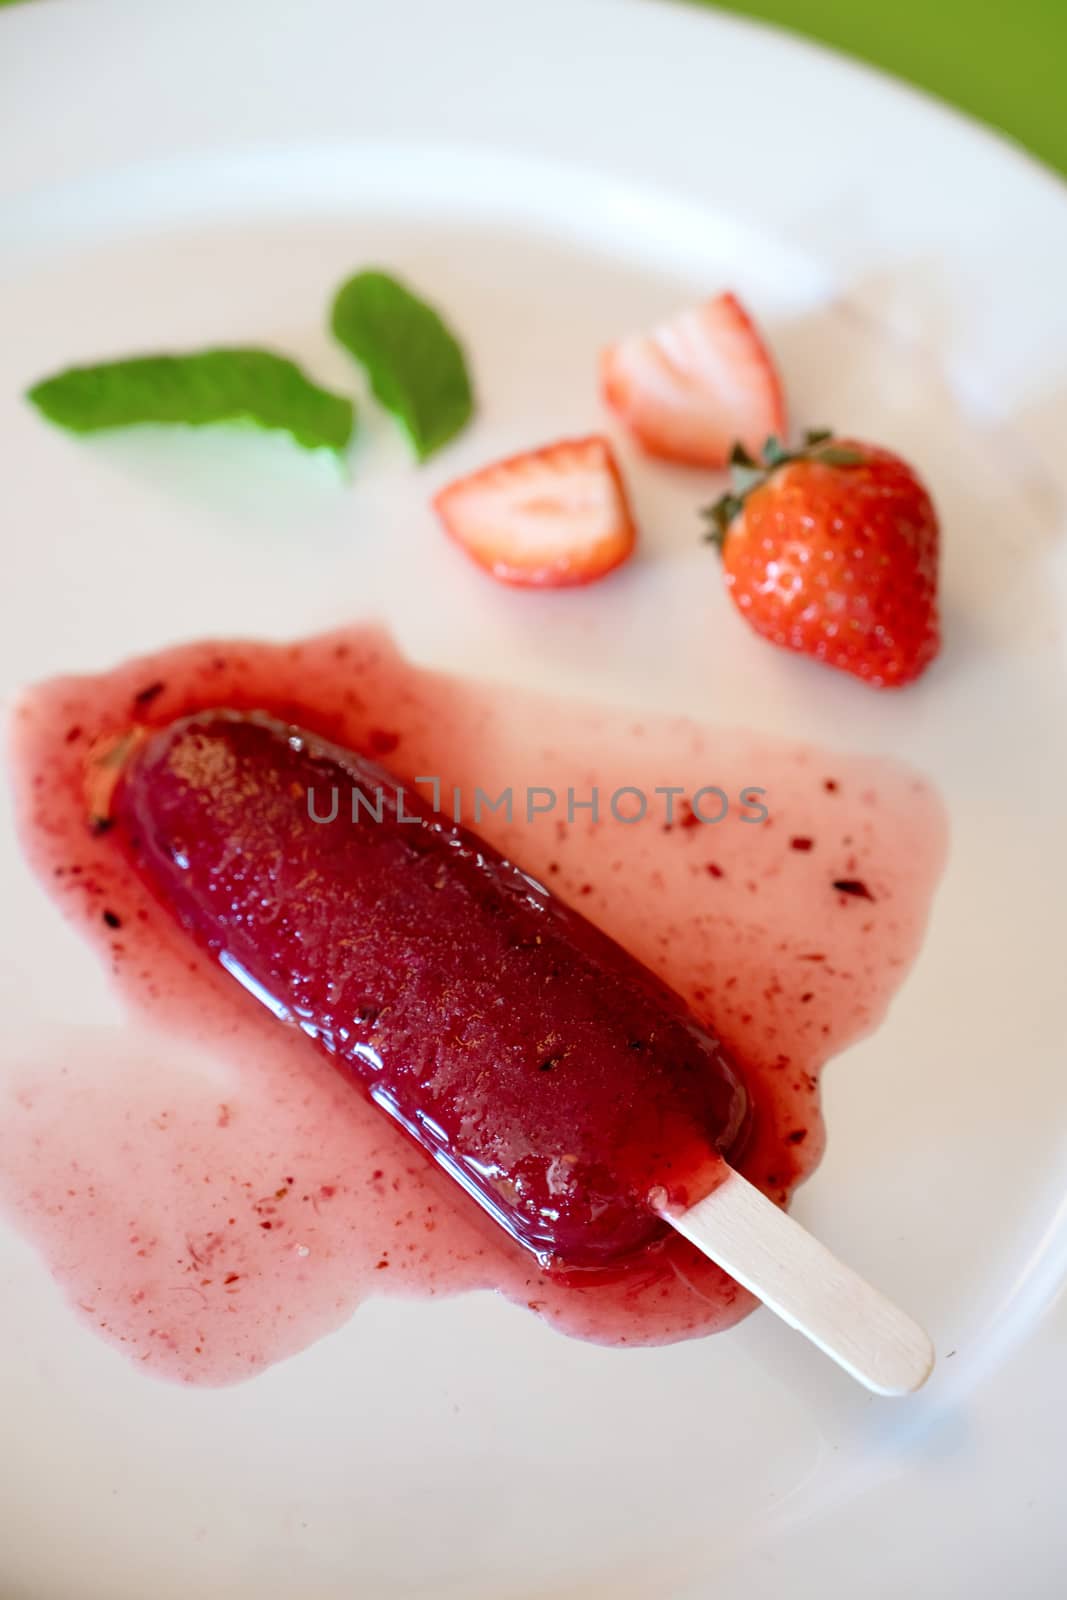 Delicious defrosted strawberry popsicle on white round dish over green background by raferto1973